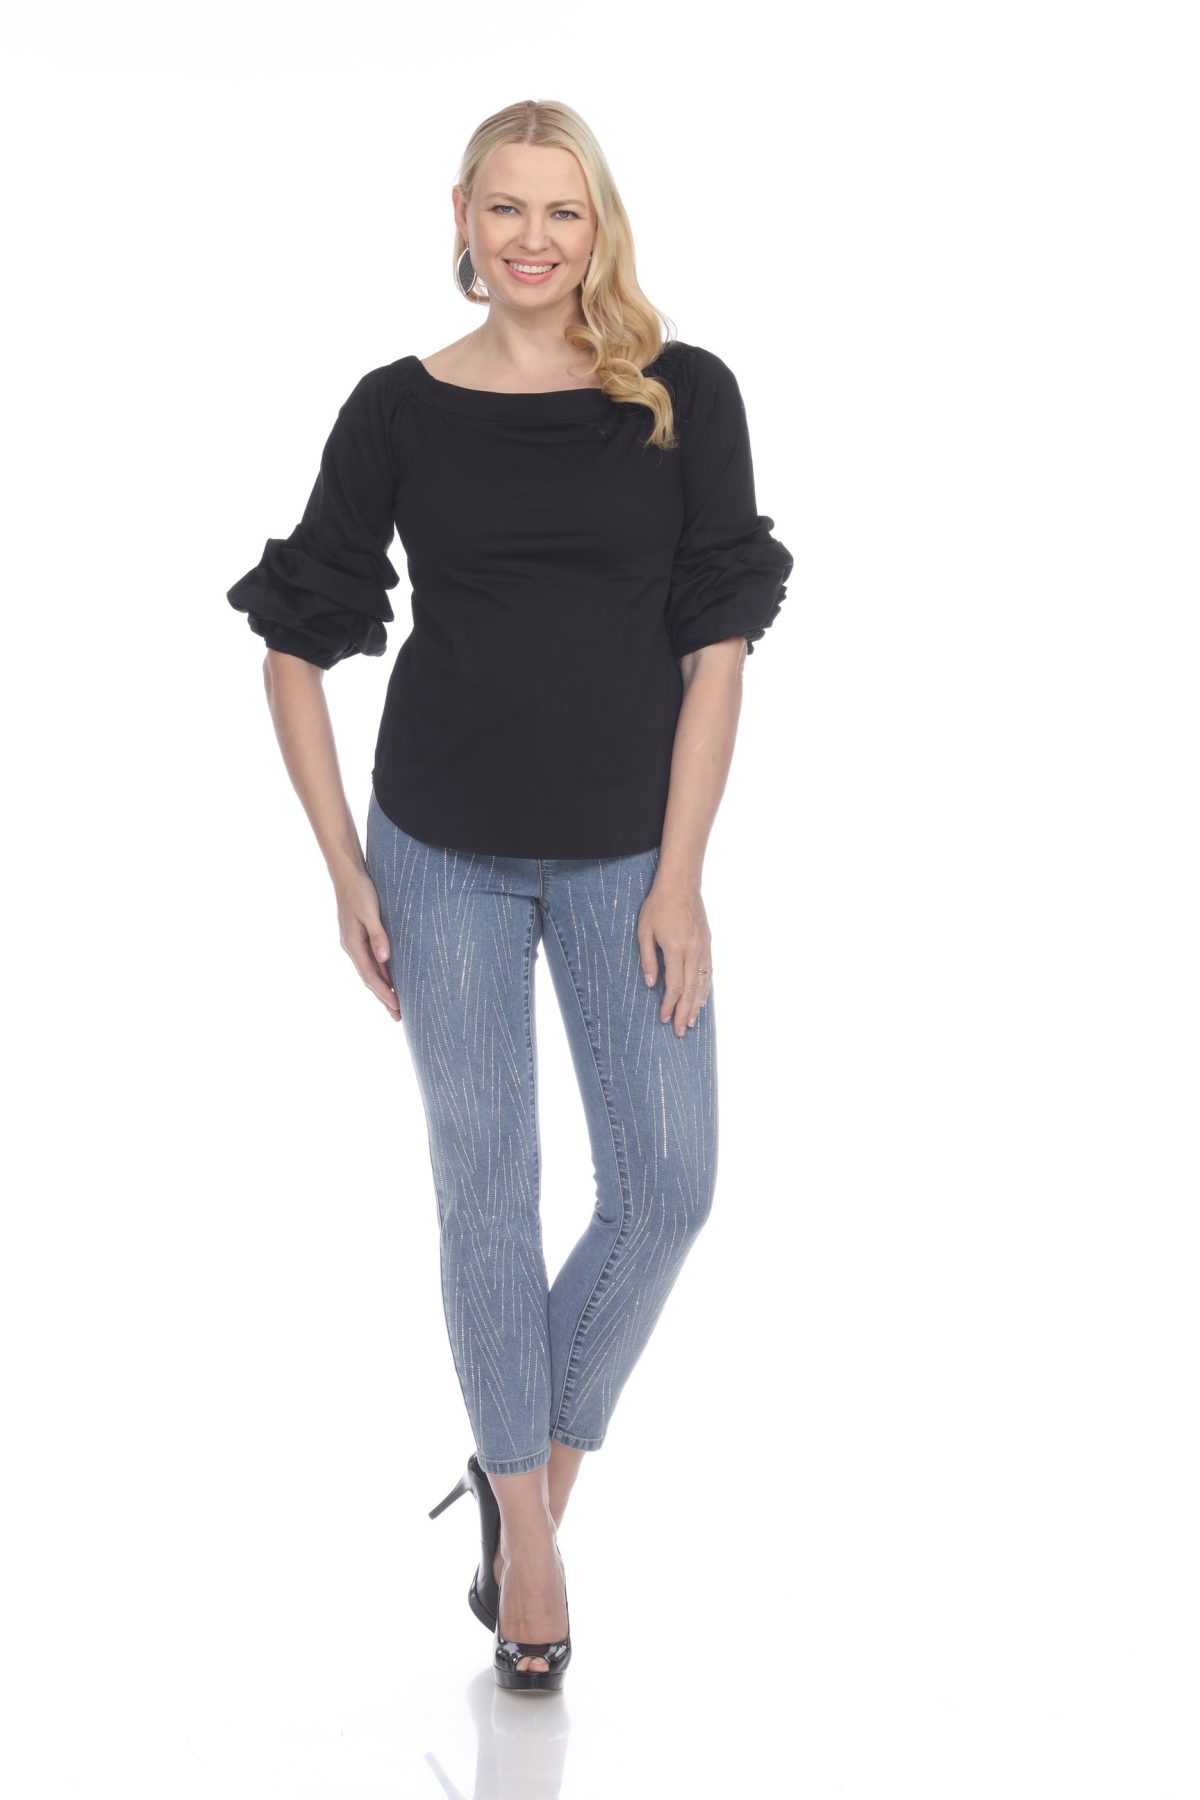 Brenda Zaro Z11986 Off Shoulder Top with Ruched Bell Sleeve| Ooh Ooh Shoes woman's clothing and shoe boutique located in Naples, Charleston and Mashpee